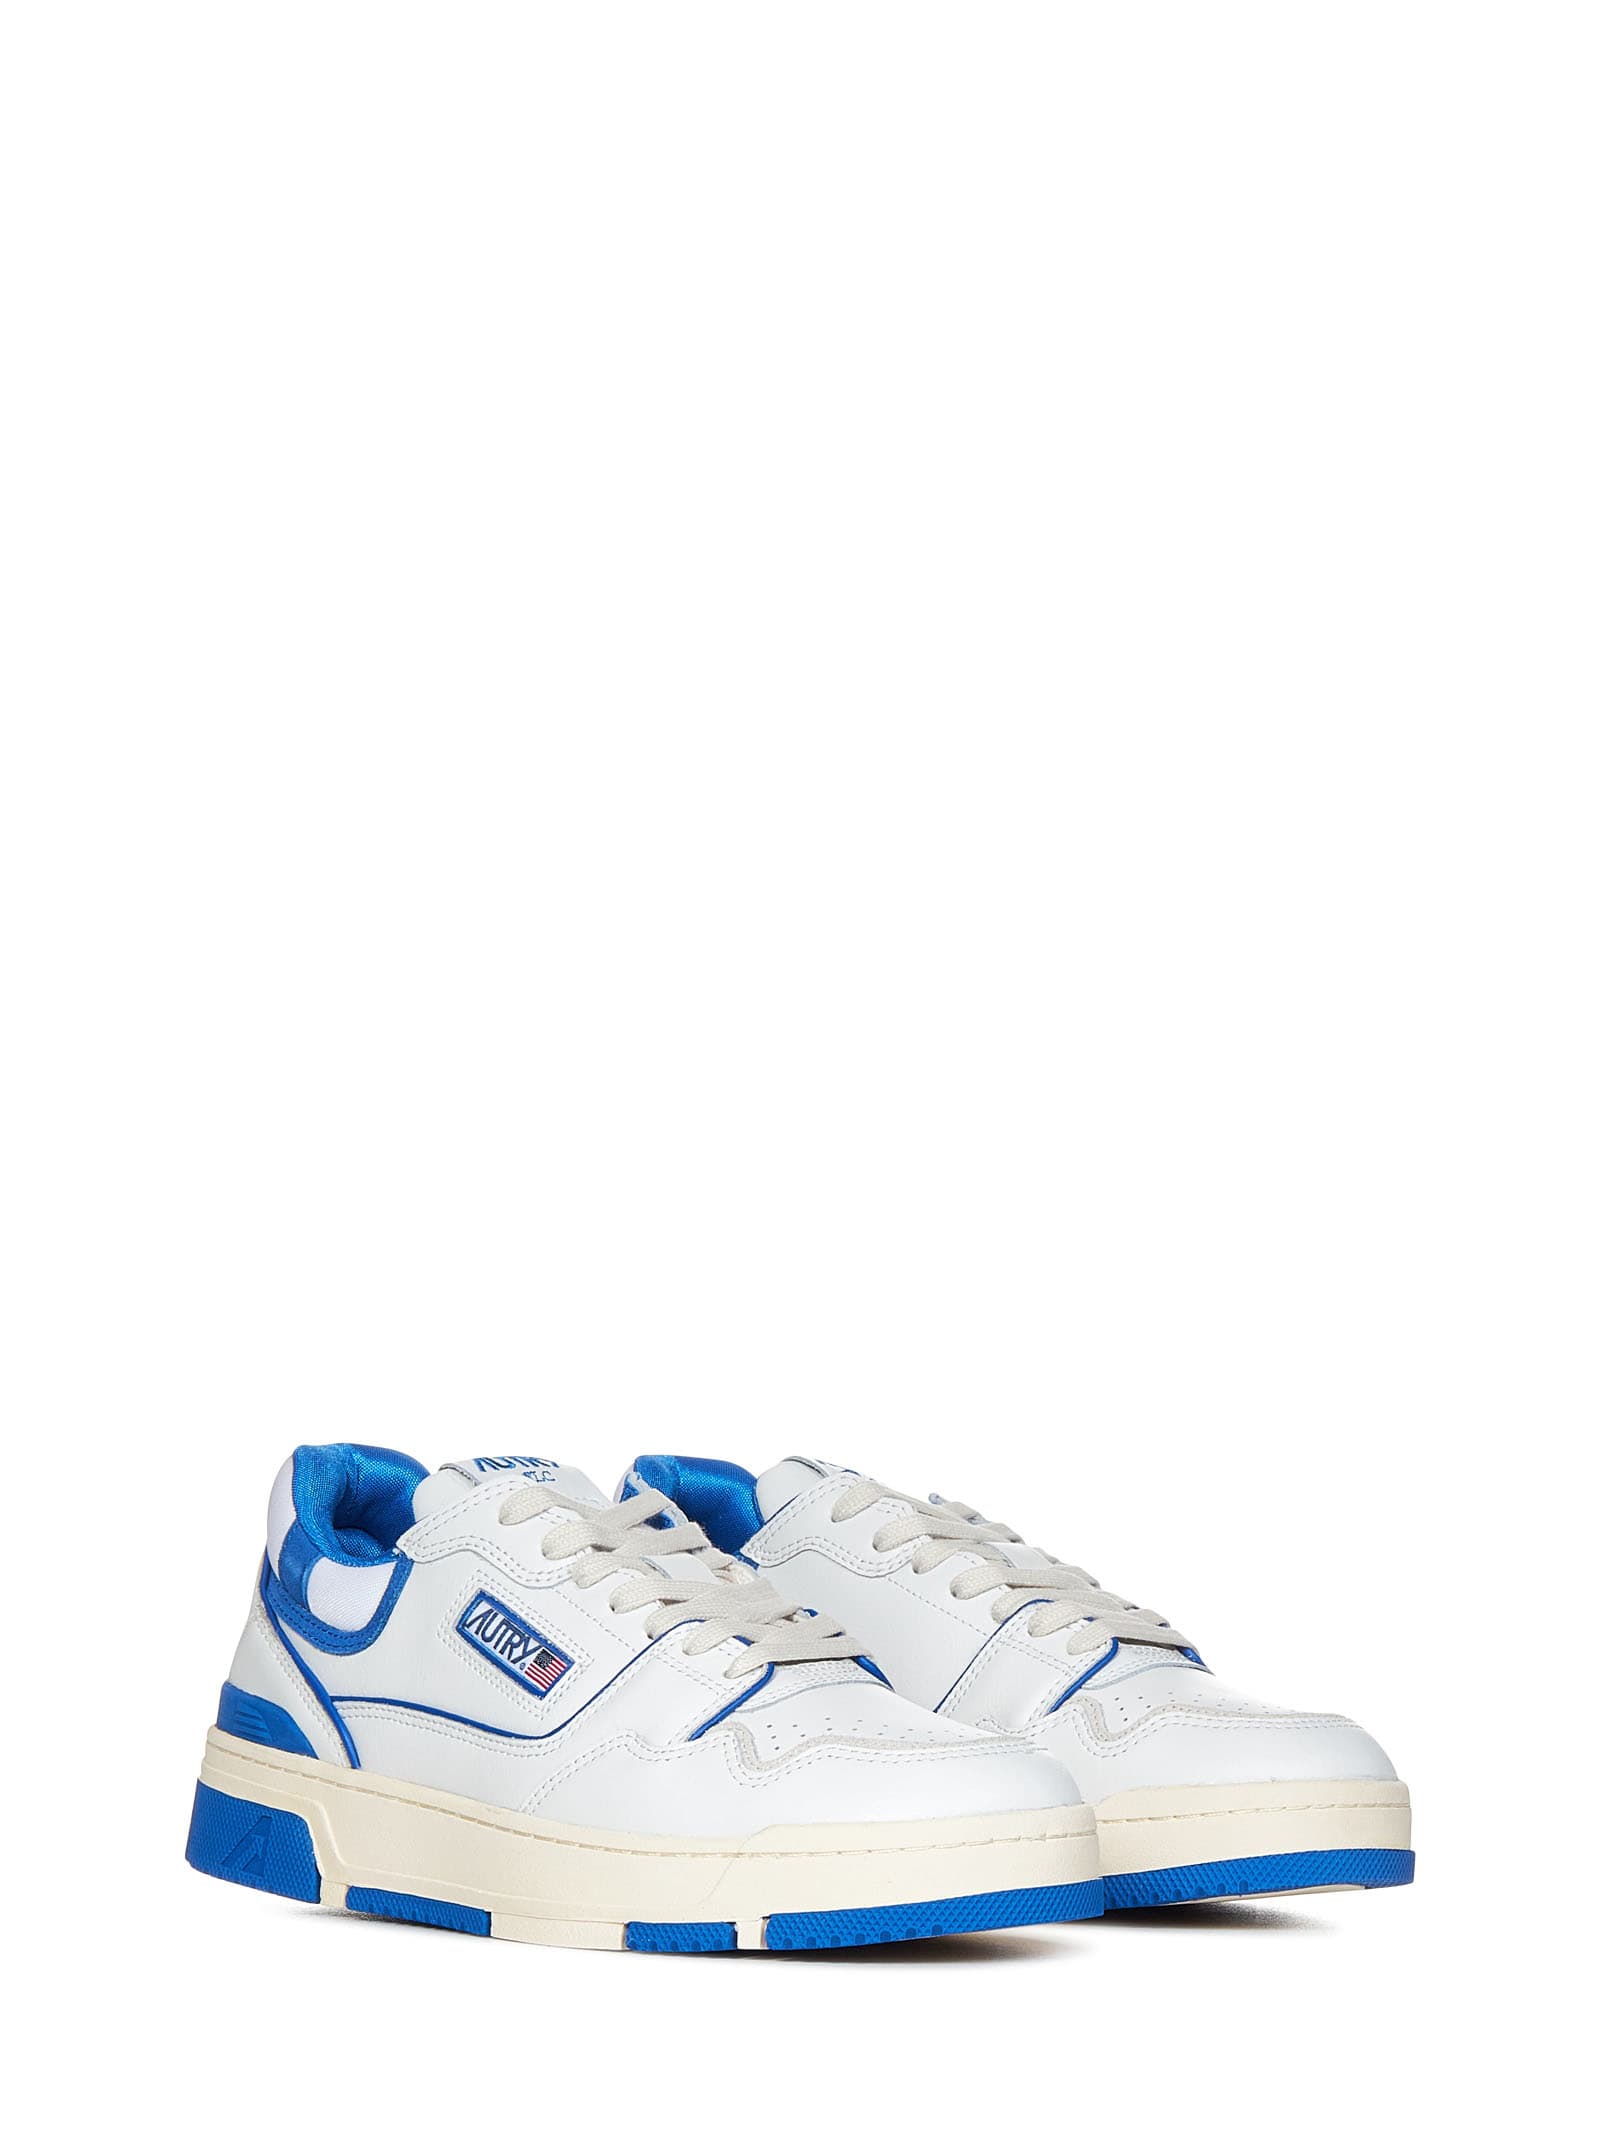 Shop Autry Clc Sneakers In White/blue